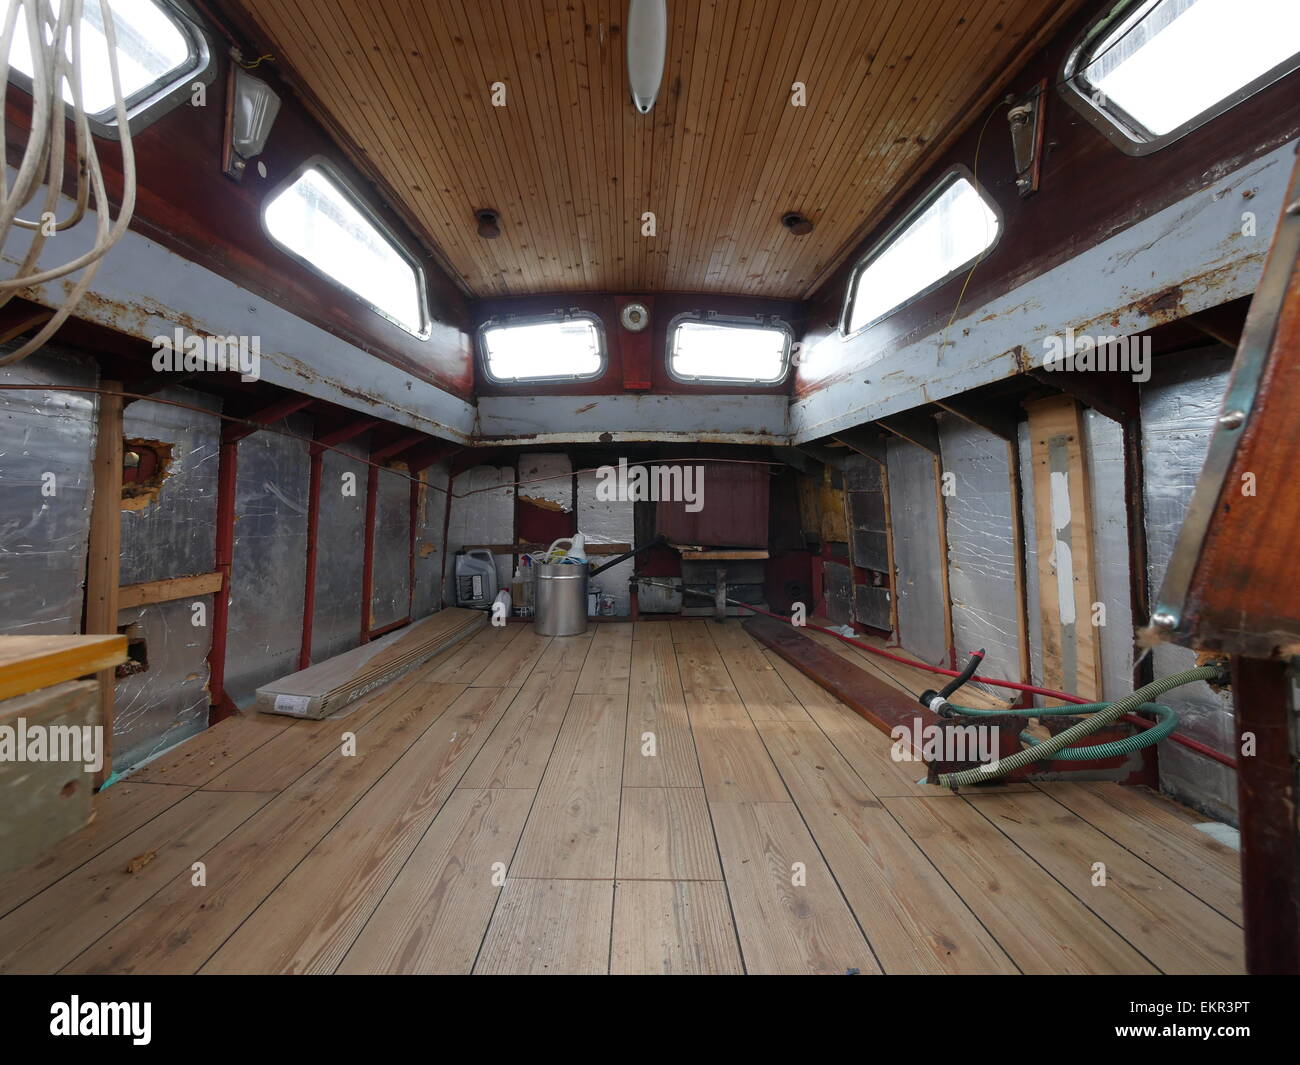 interior view of an old steel hulled boat in process of being stripped down and repaired and refurbished as a project Stock Photo